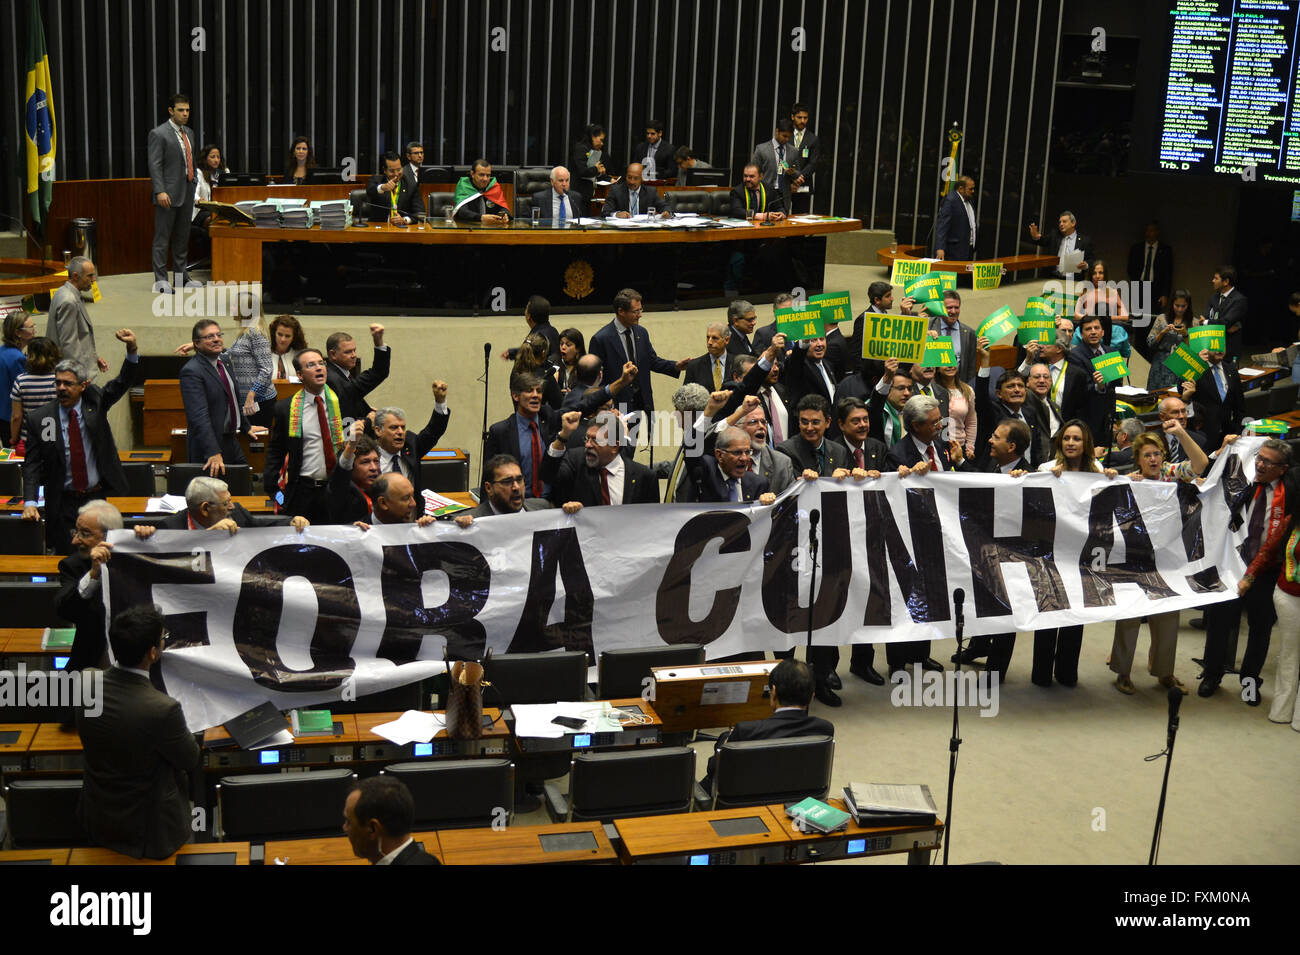 Opposition members of the House of Deputies show their support for the impeachment of President Dilma Rousseff as the lower house debates the motion April 16, 2016 in Brasilia, Brazil. Opposition members want to replace Rousseff with Speaker Eduardo Cunha. Stock Photo